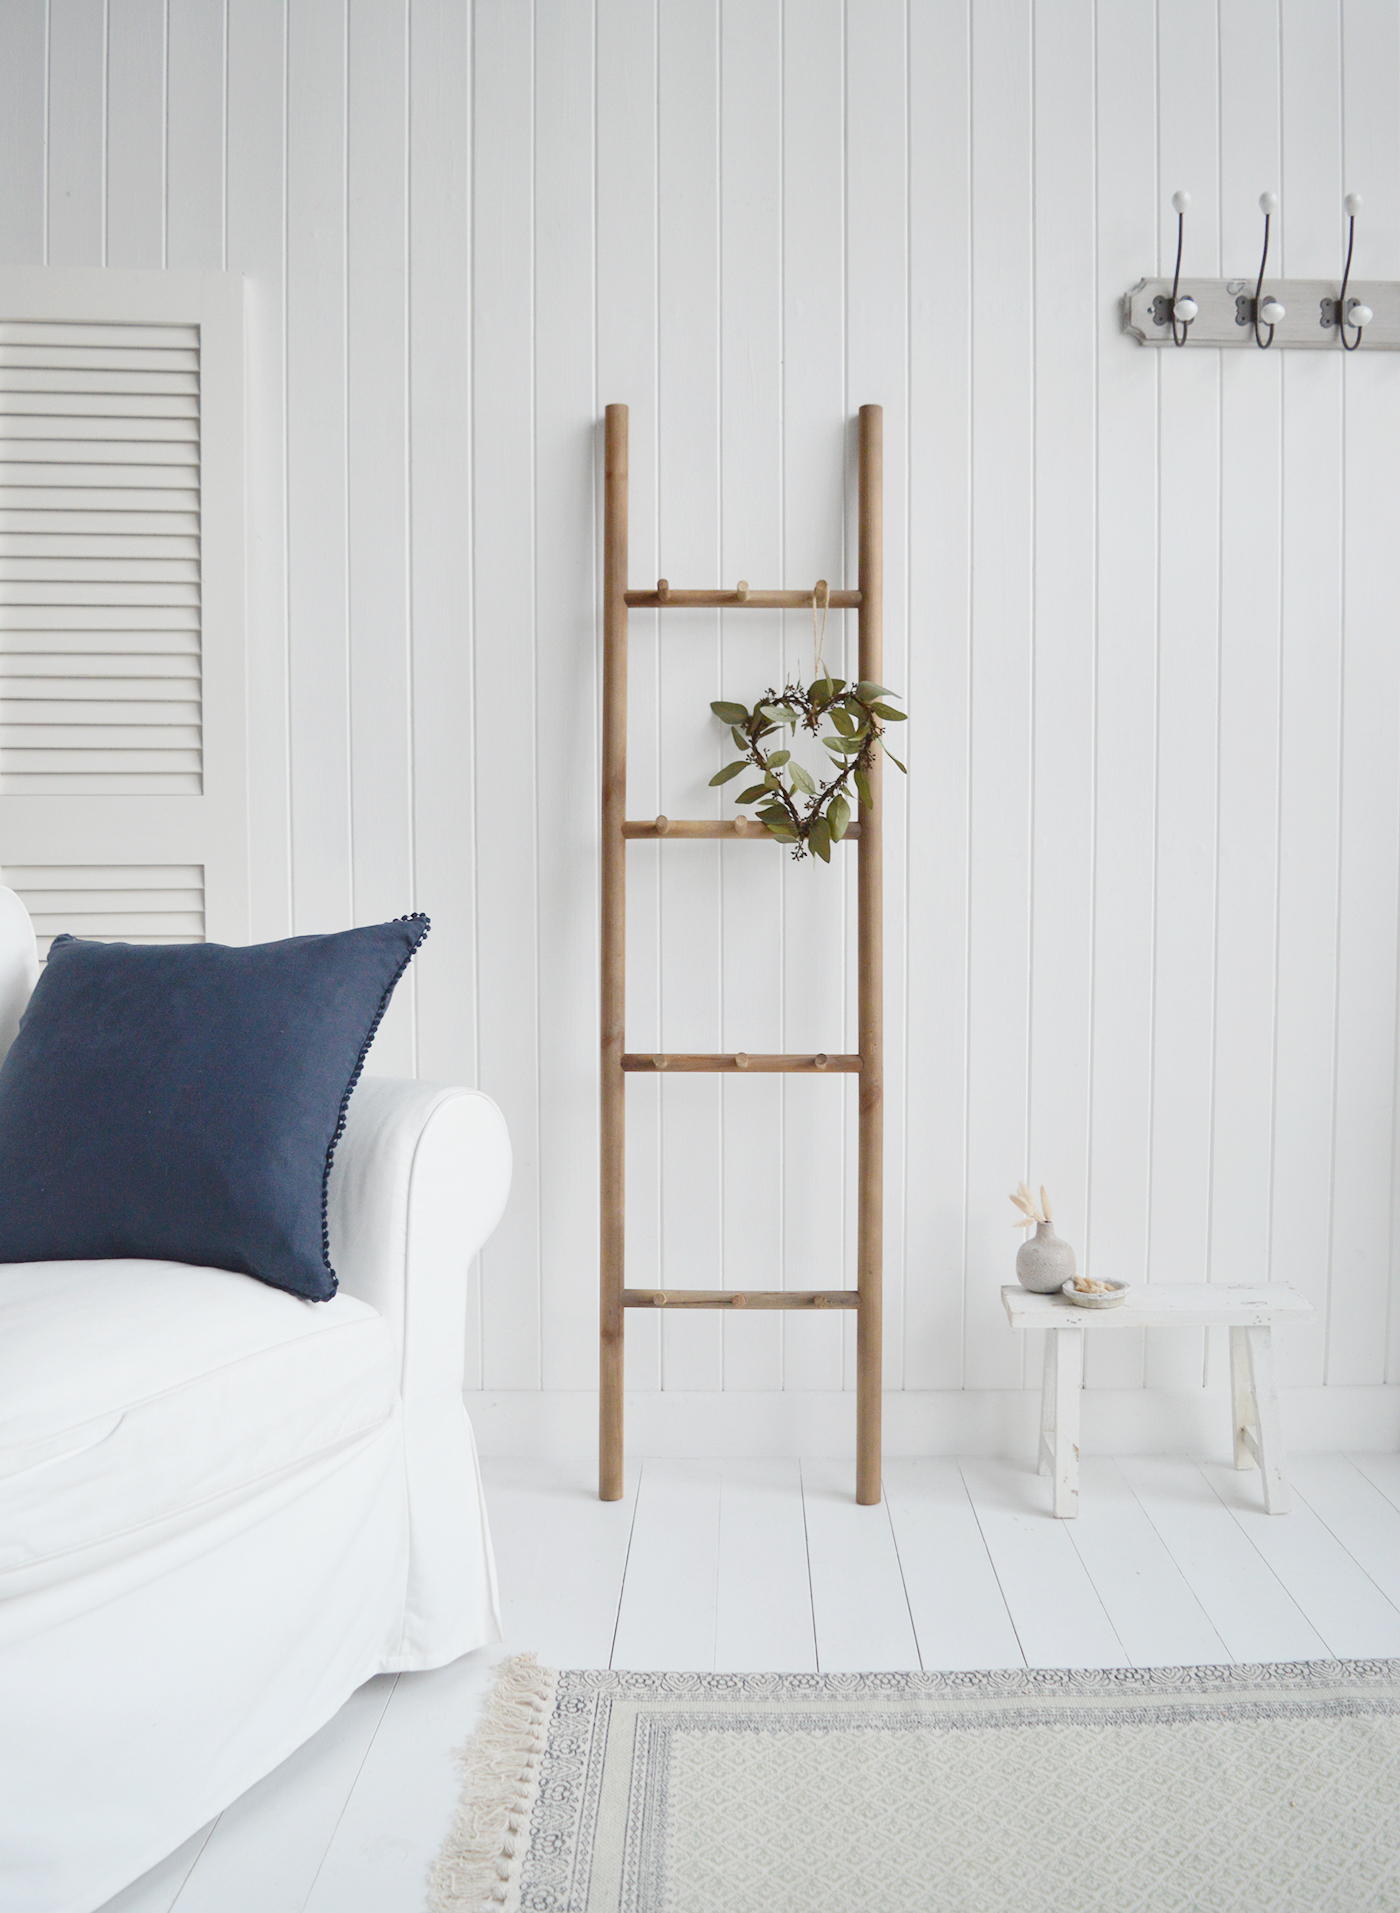 Salisbury Wooden Ladder with Pegs ladder for styling in Coastal, Country, New England and Modern Farmhouse styled home interiors